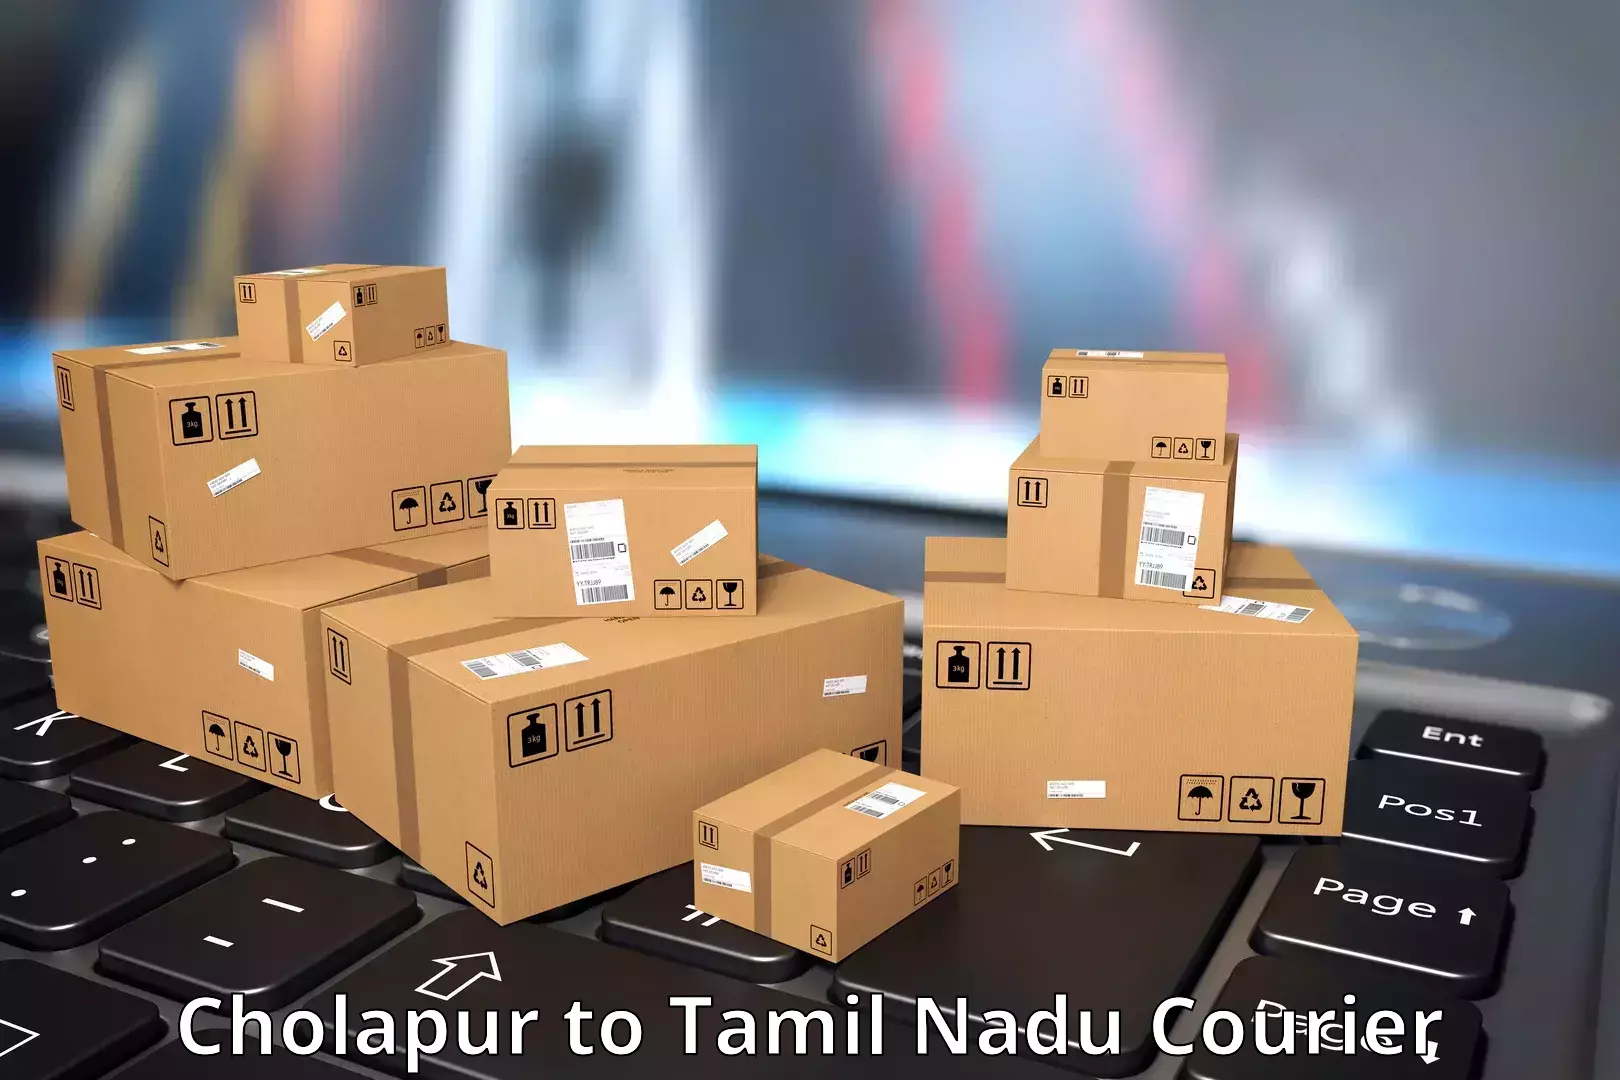 Reliable delivery network Cholapur to Nagapattinam